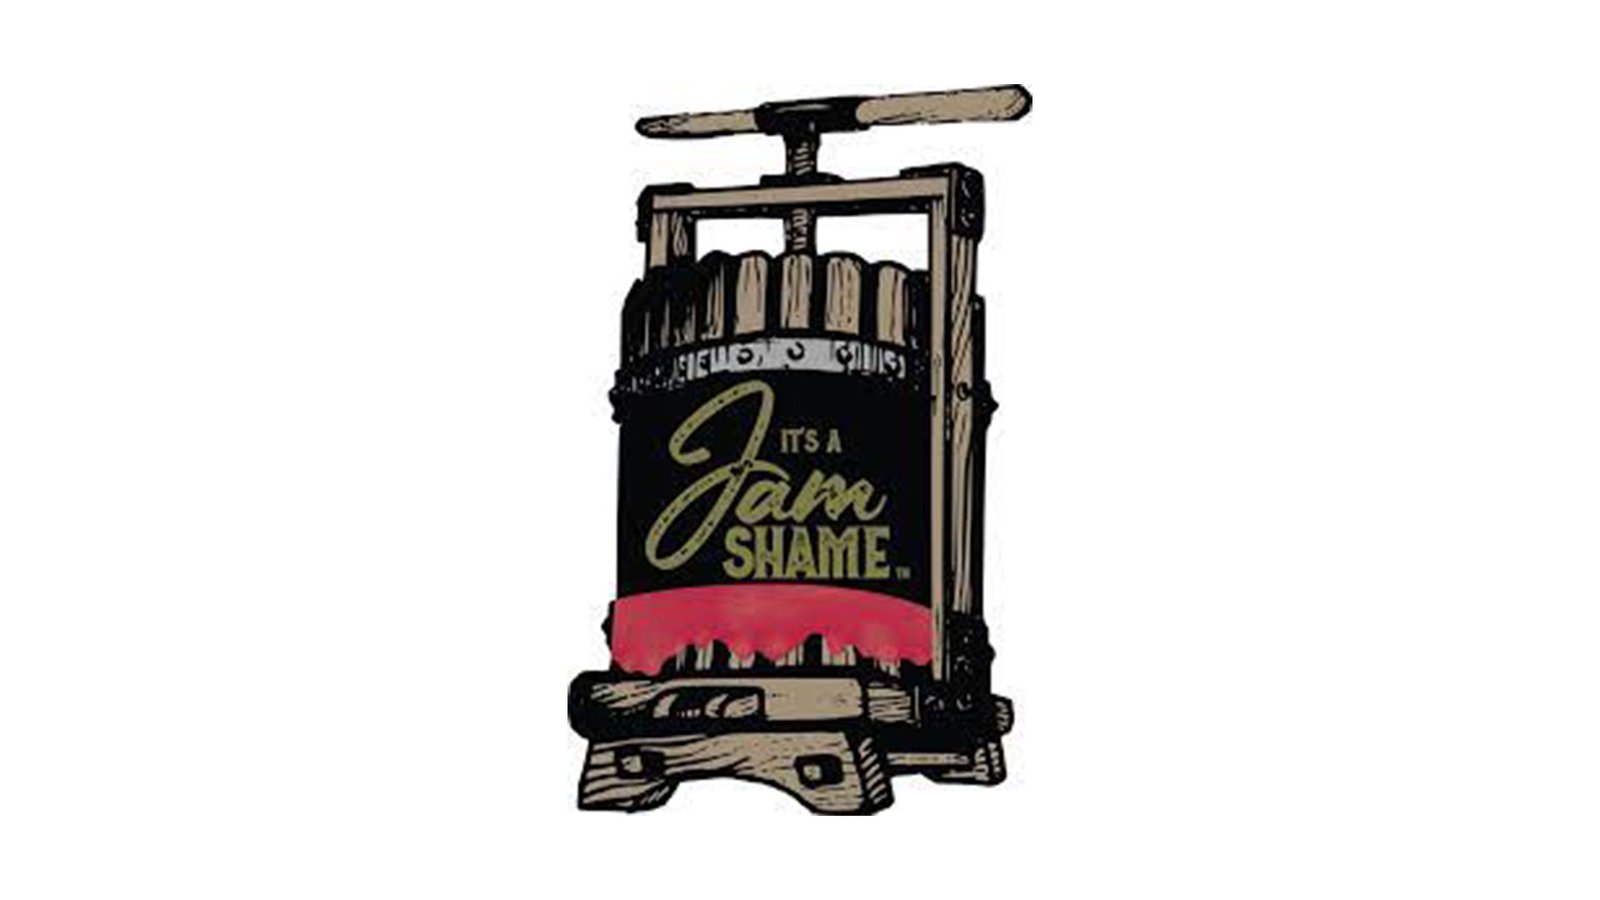 Our co-packing service customer, "It's A Jam Shame's" Logo